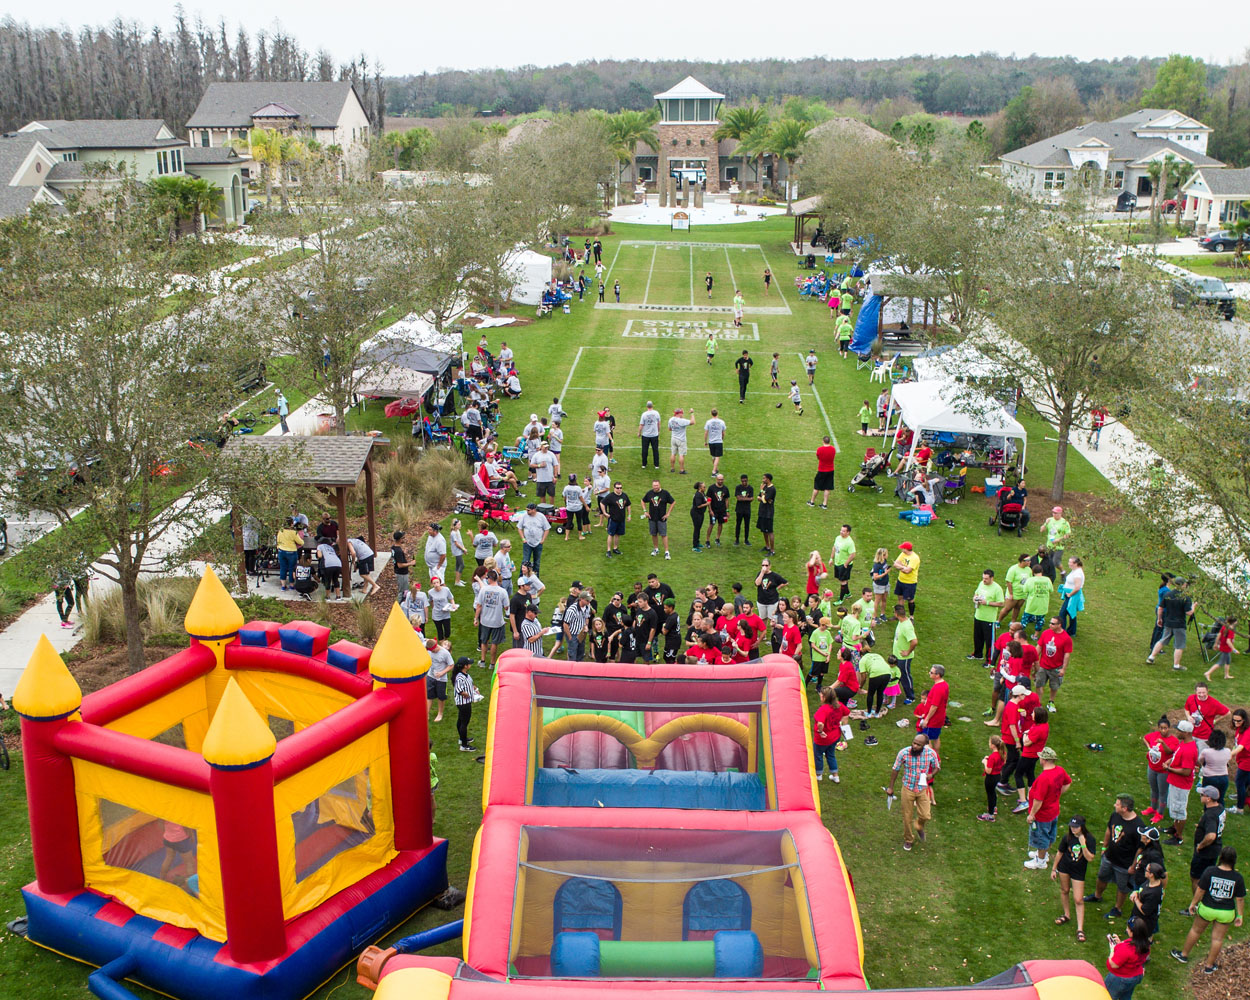 Union Park community event with bouncy houses